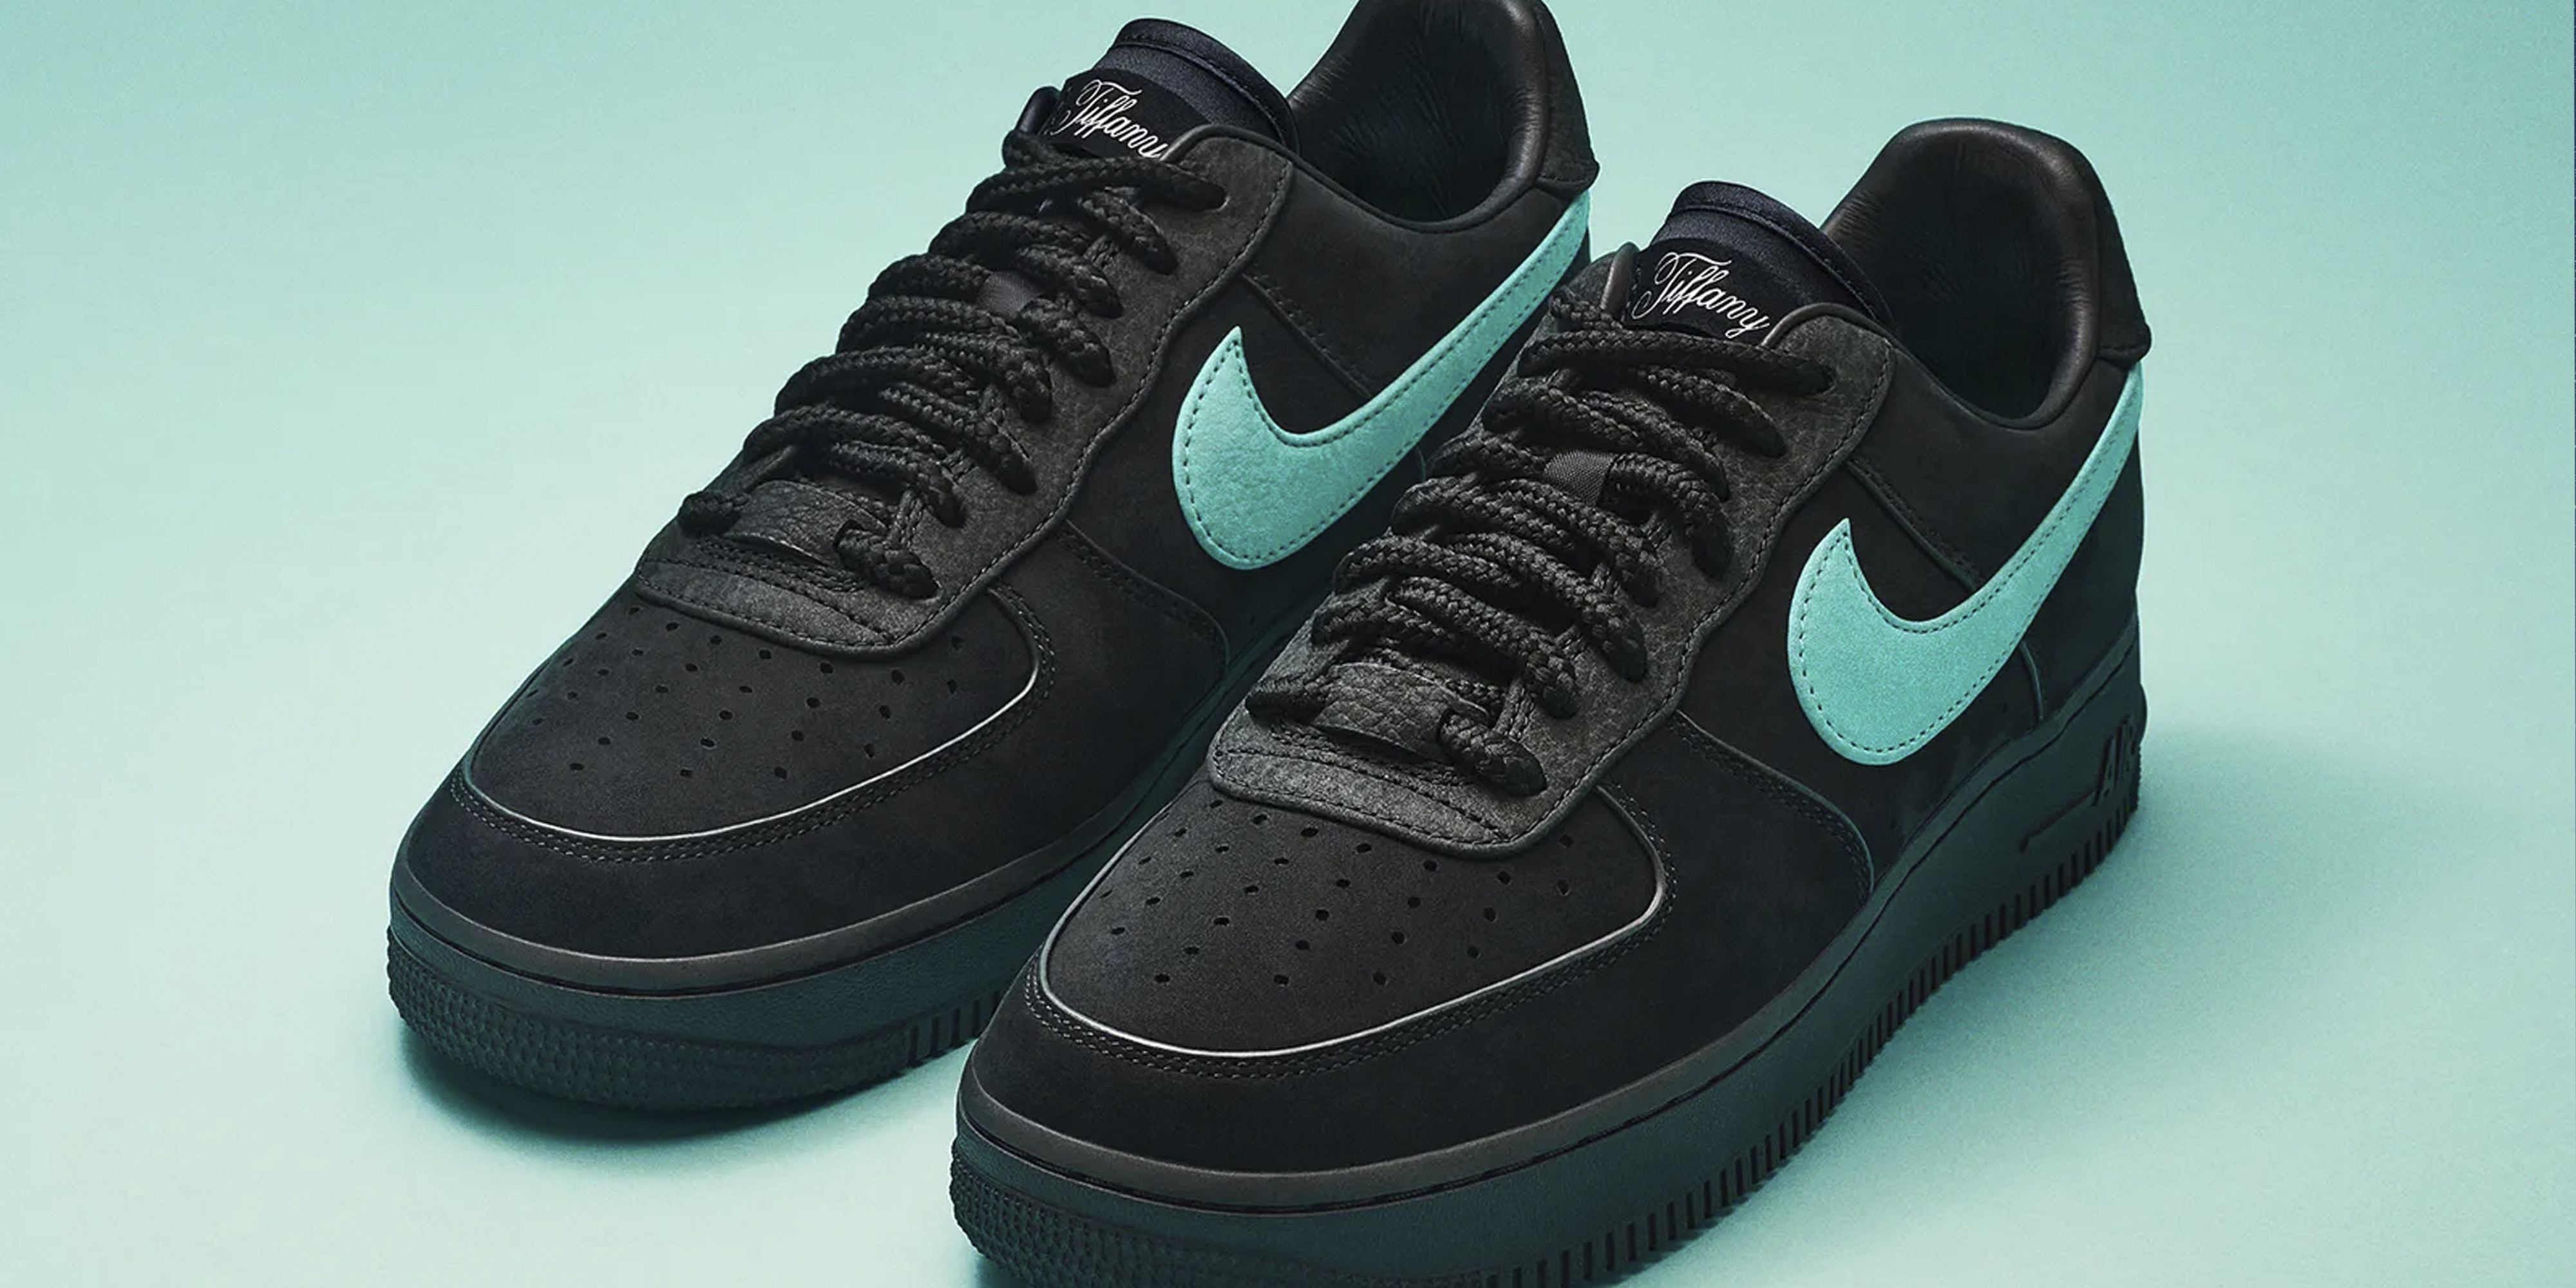 How to Buy the Tiffany & Co. x Nike Air Force 1 Low '1837'